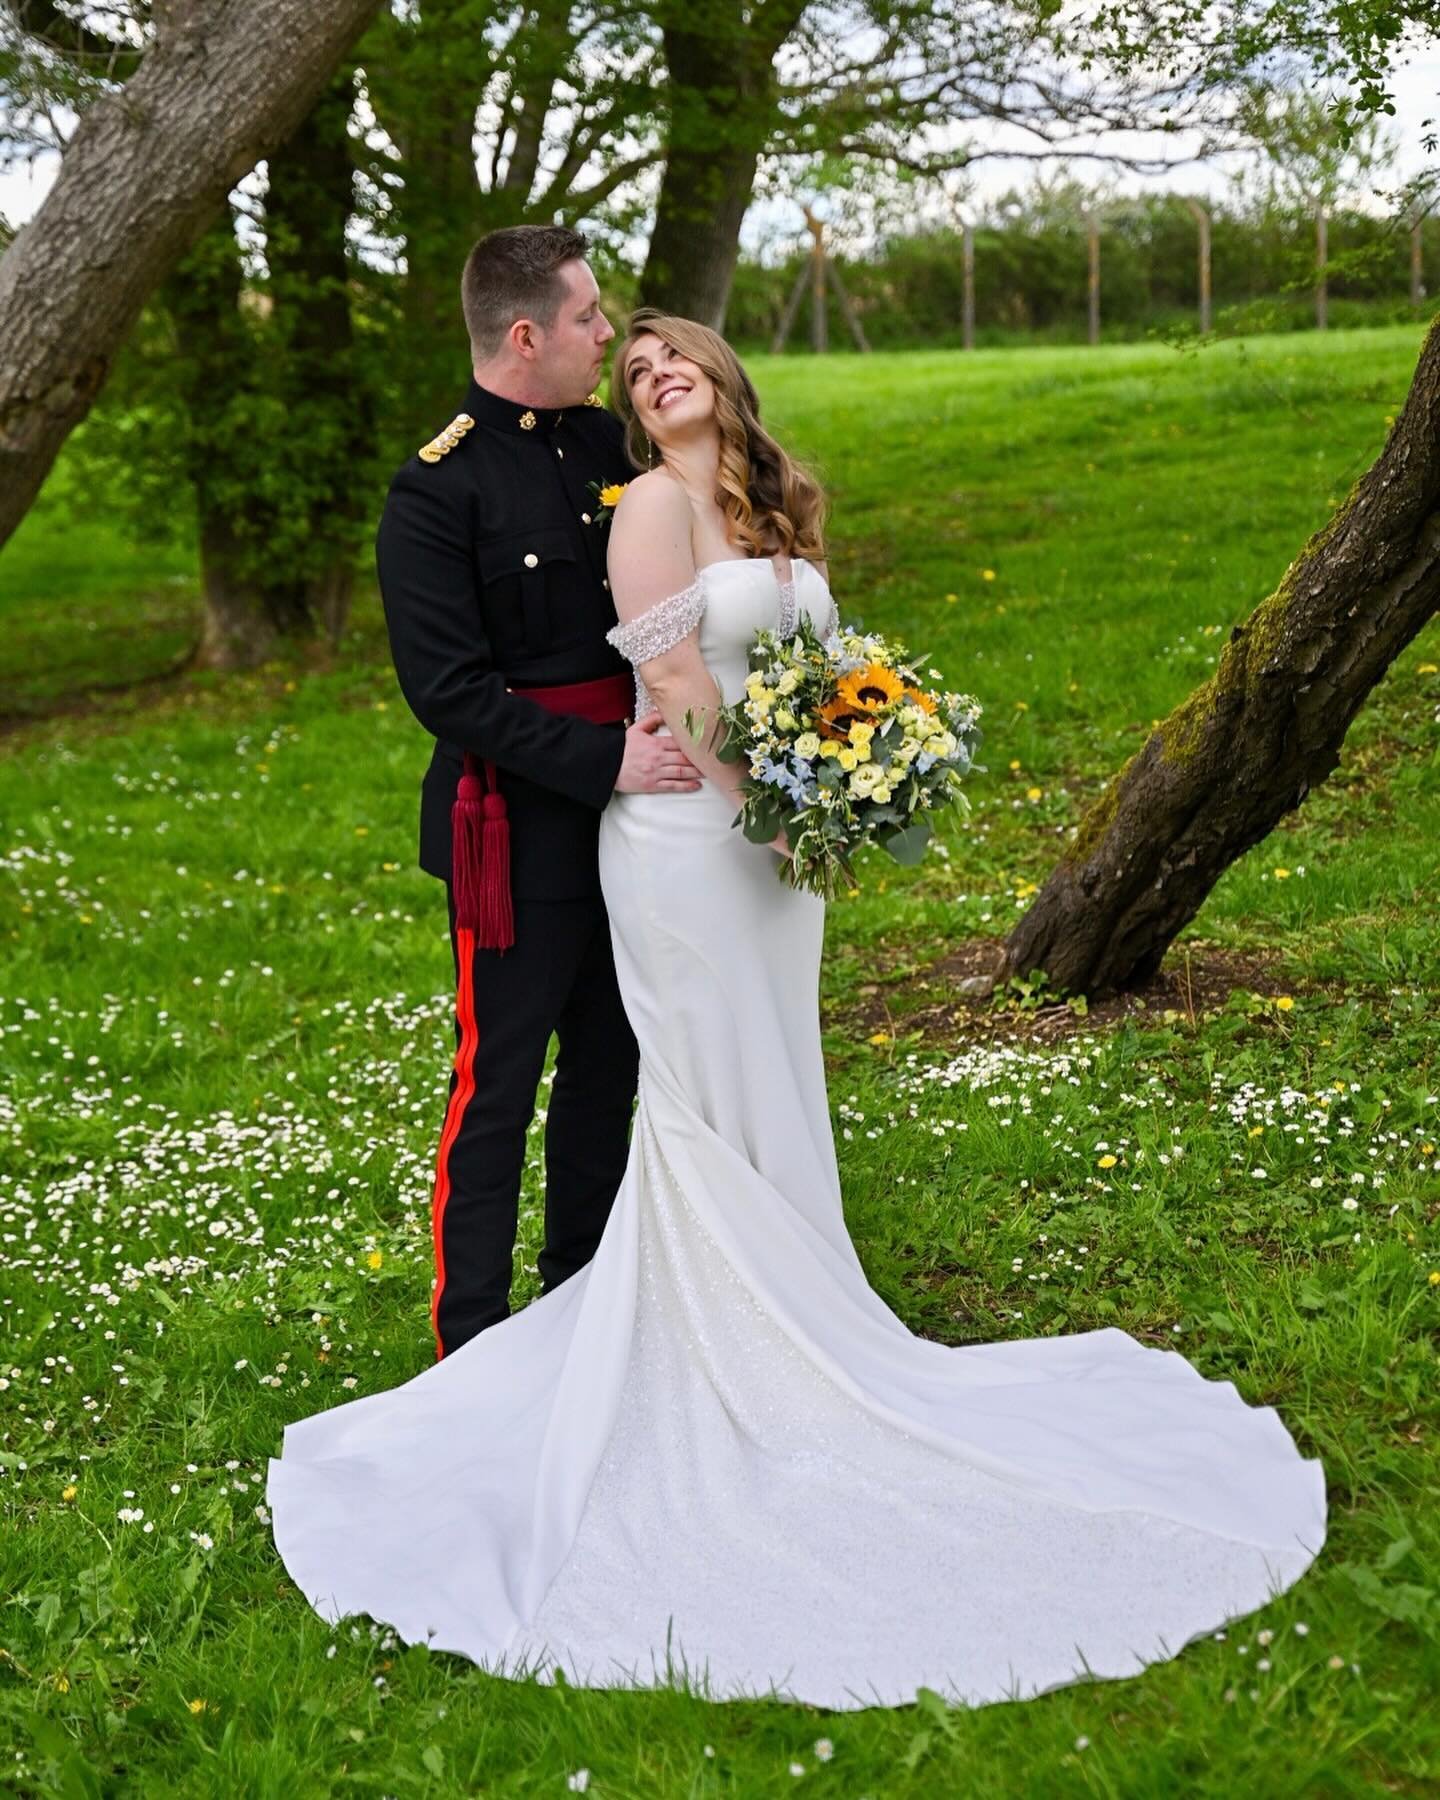 Two from yesterday&rsquo;s absolutely soldier-tastic The Duke of Gloucester Barracks, South Cerney, Gloucestershire, where BOTH of this gorgeous pair who are in the Army celebrated their wedding. 

It&rsquo;s always fabulous to be back on a military 